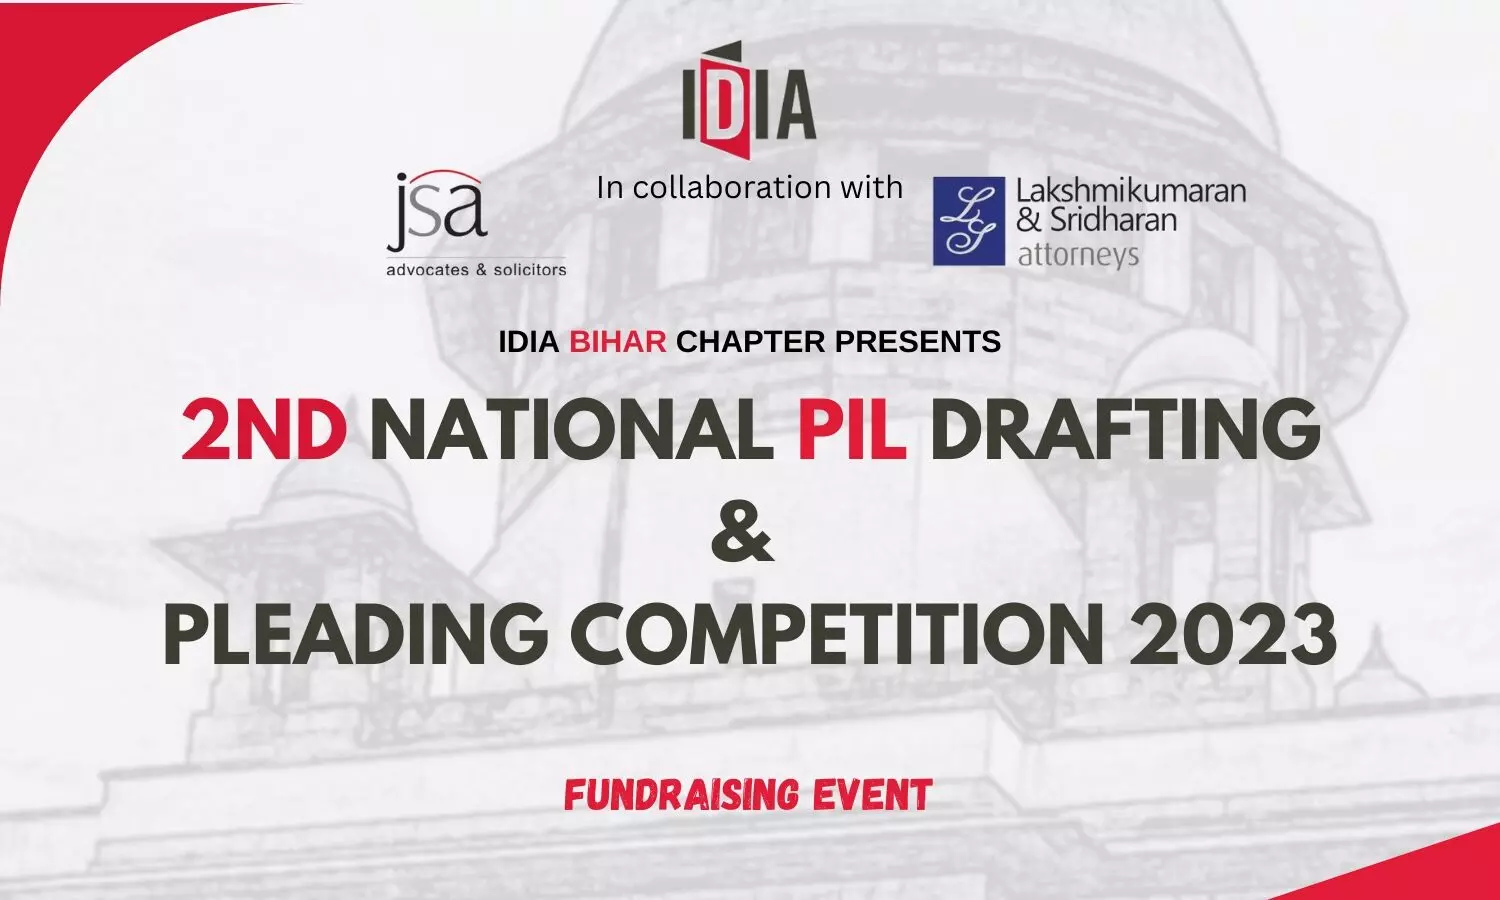 2nd National PIL Drafting & Pleading Competition 2023